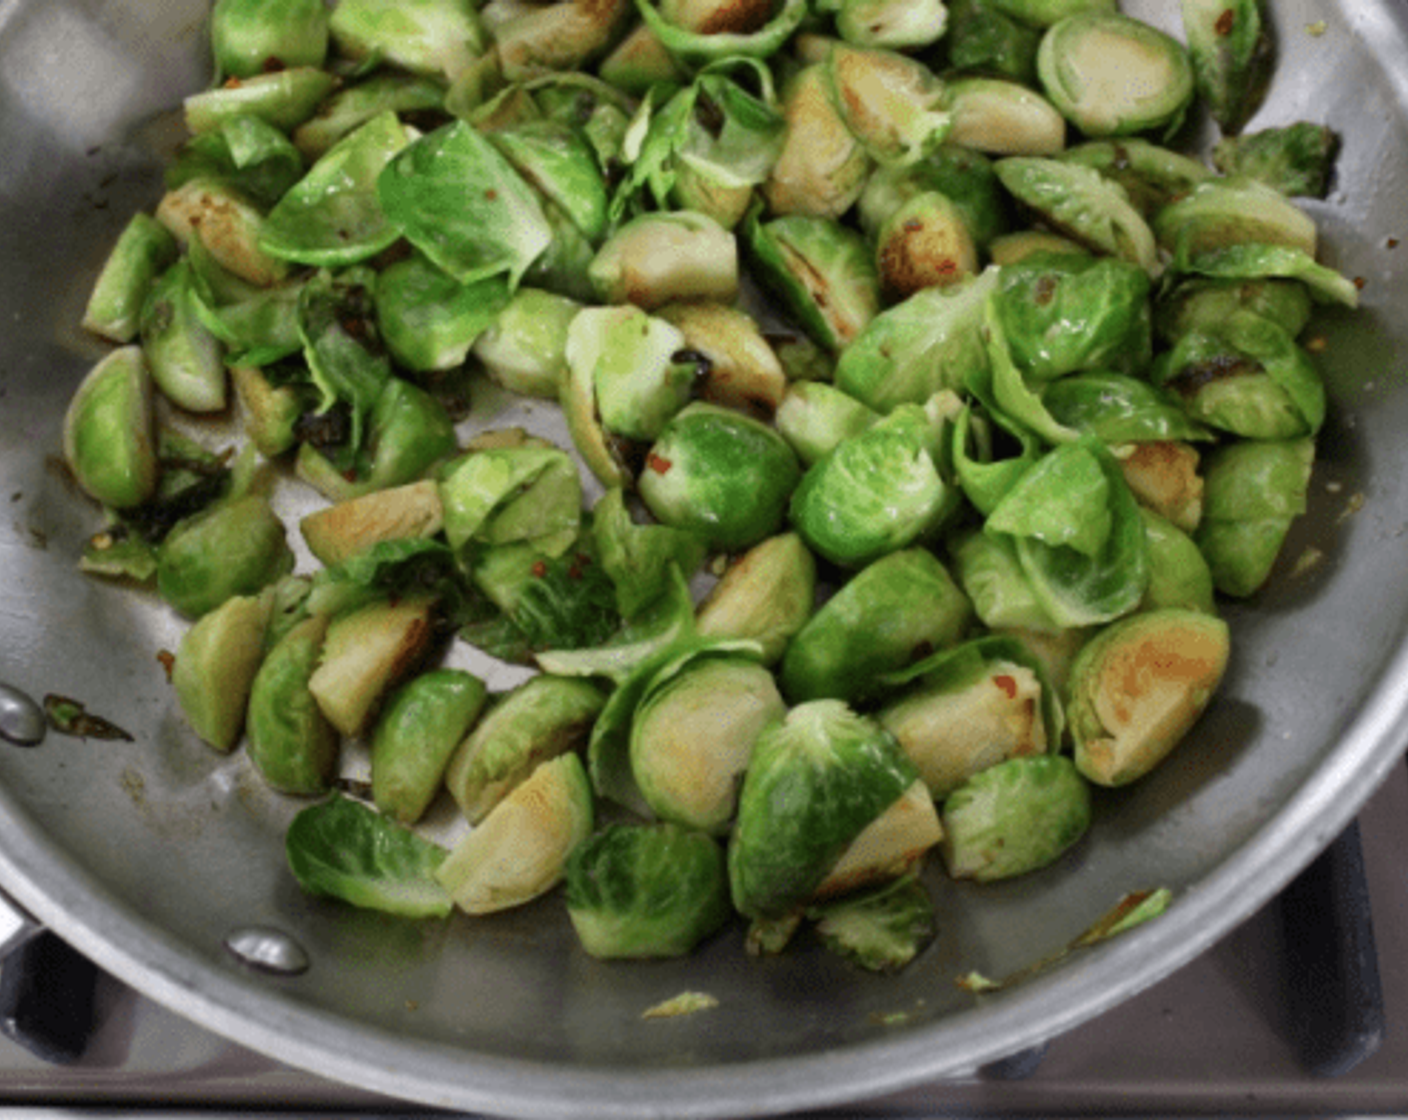 step 4 Cook for 3 minutes without stirring, to allow the Brussels sprouts to develop a char on the bottom.